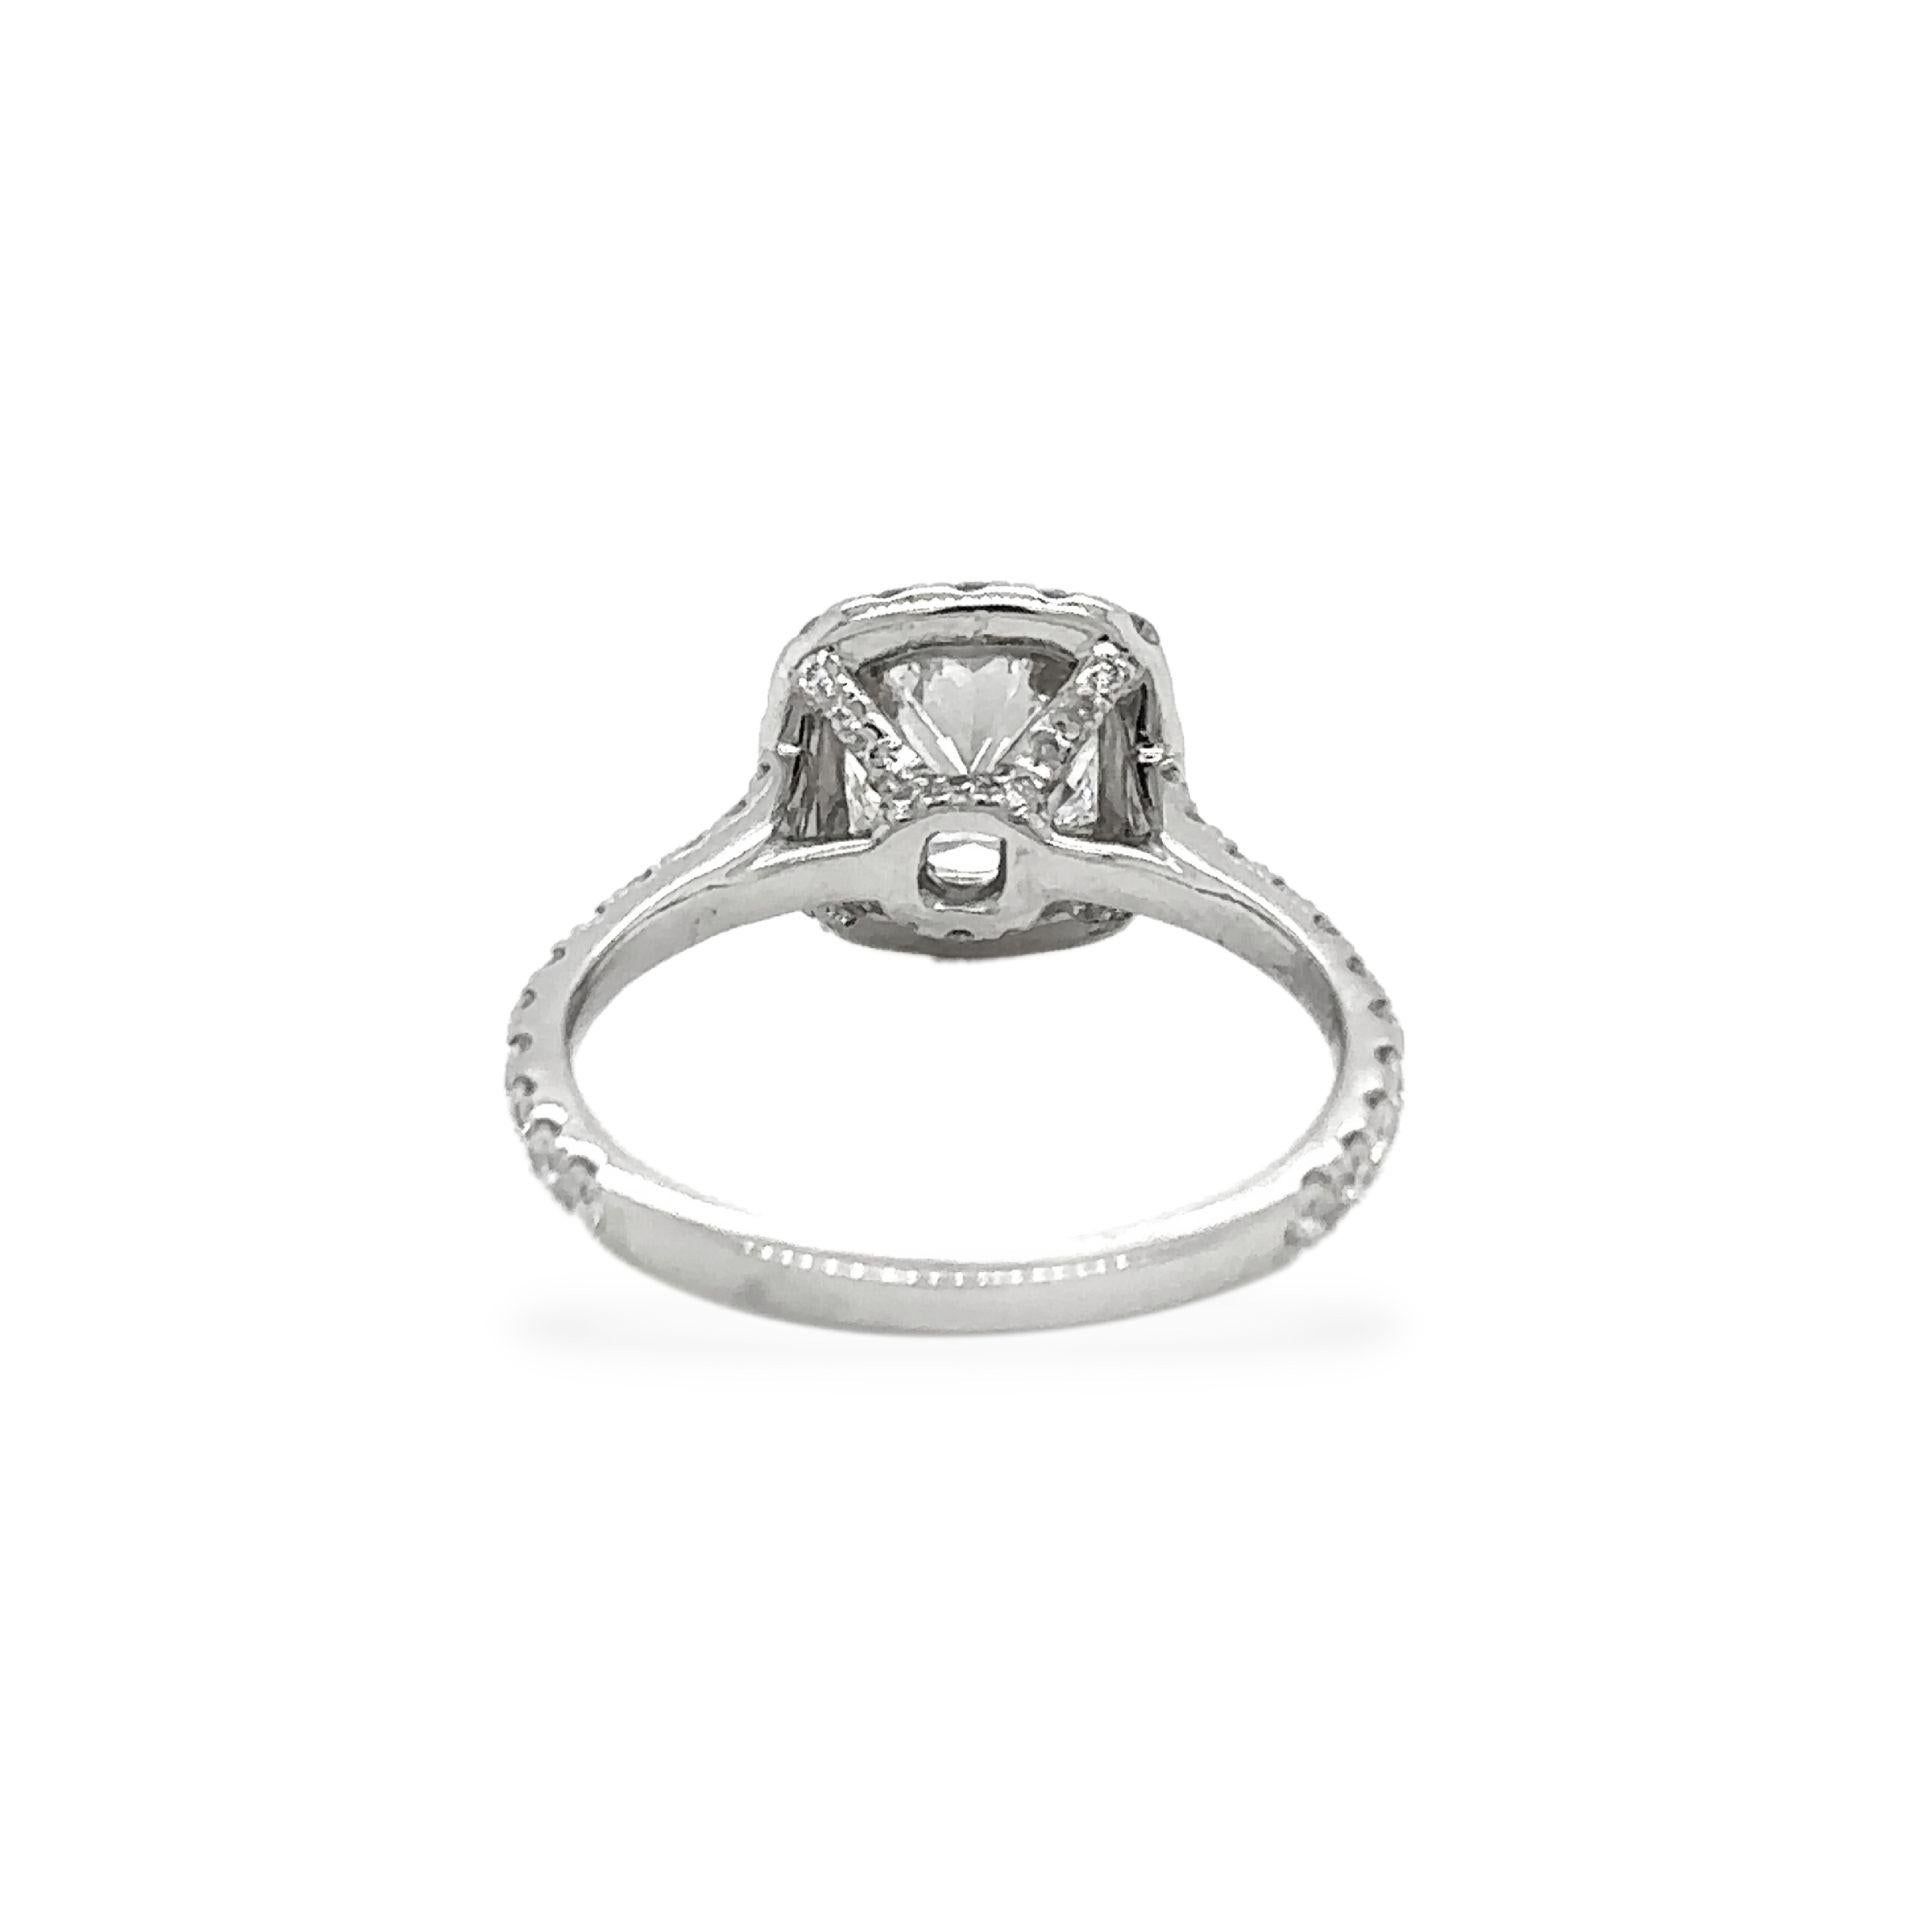 Diamond Cushion Cut 1.17 Carat Engagement Ring Platinum with GIA Certificate For Sale 1